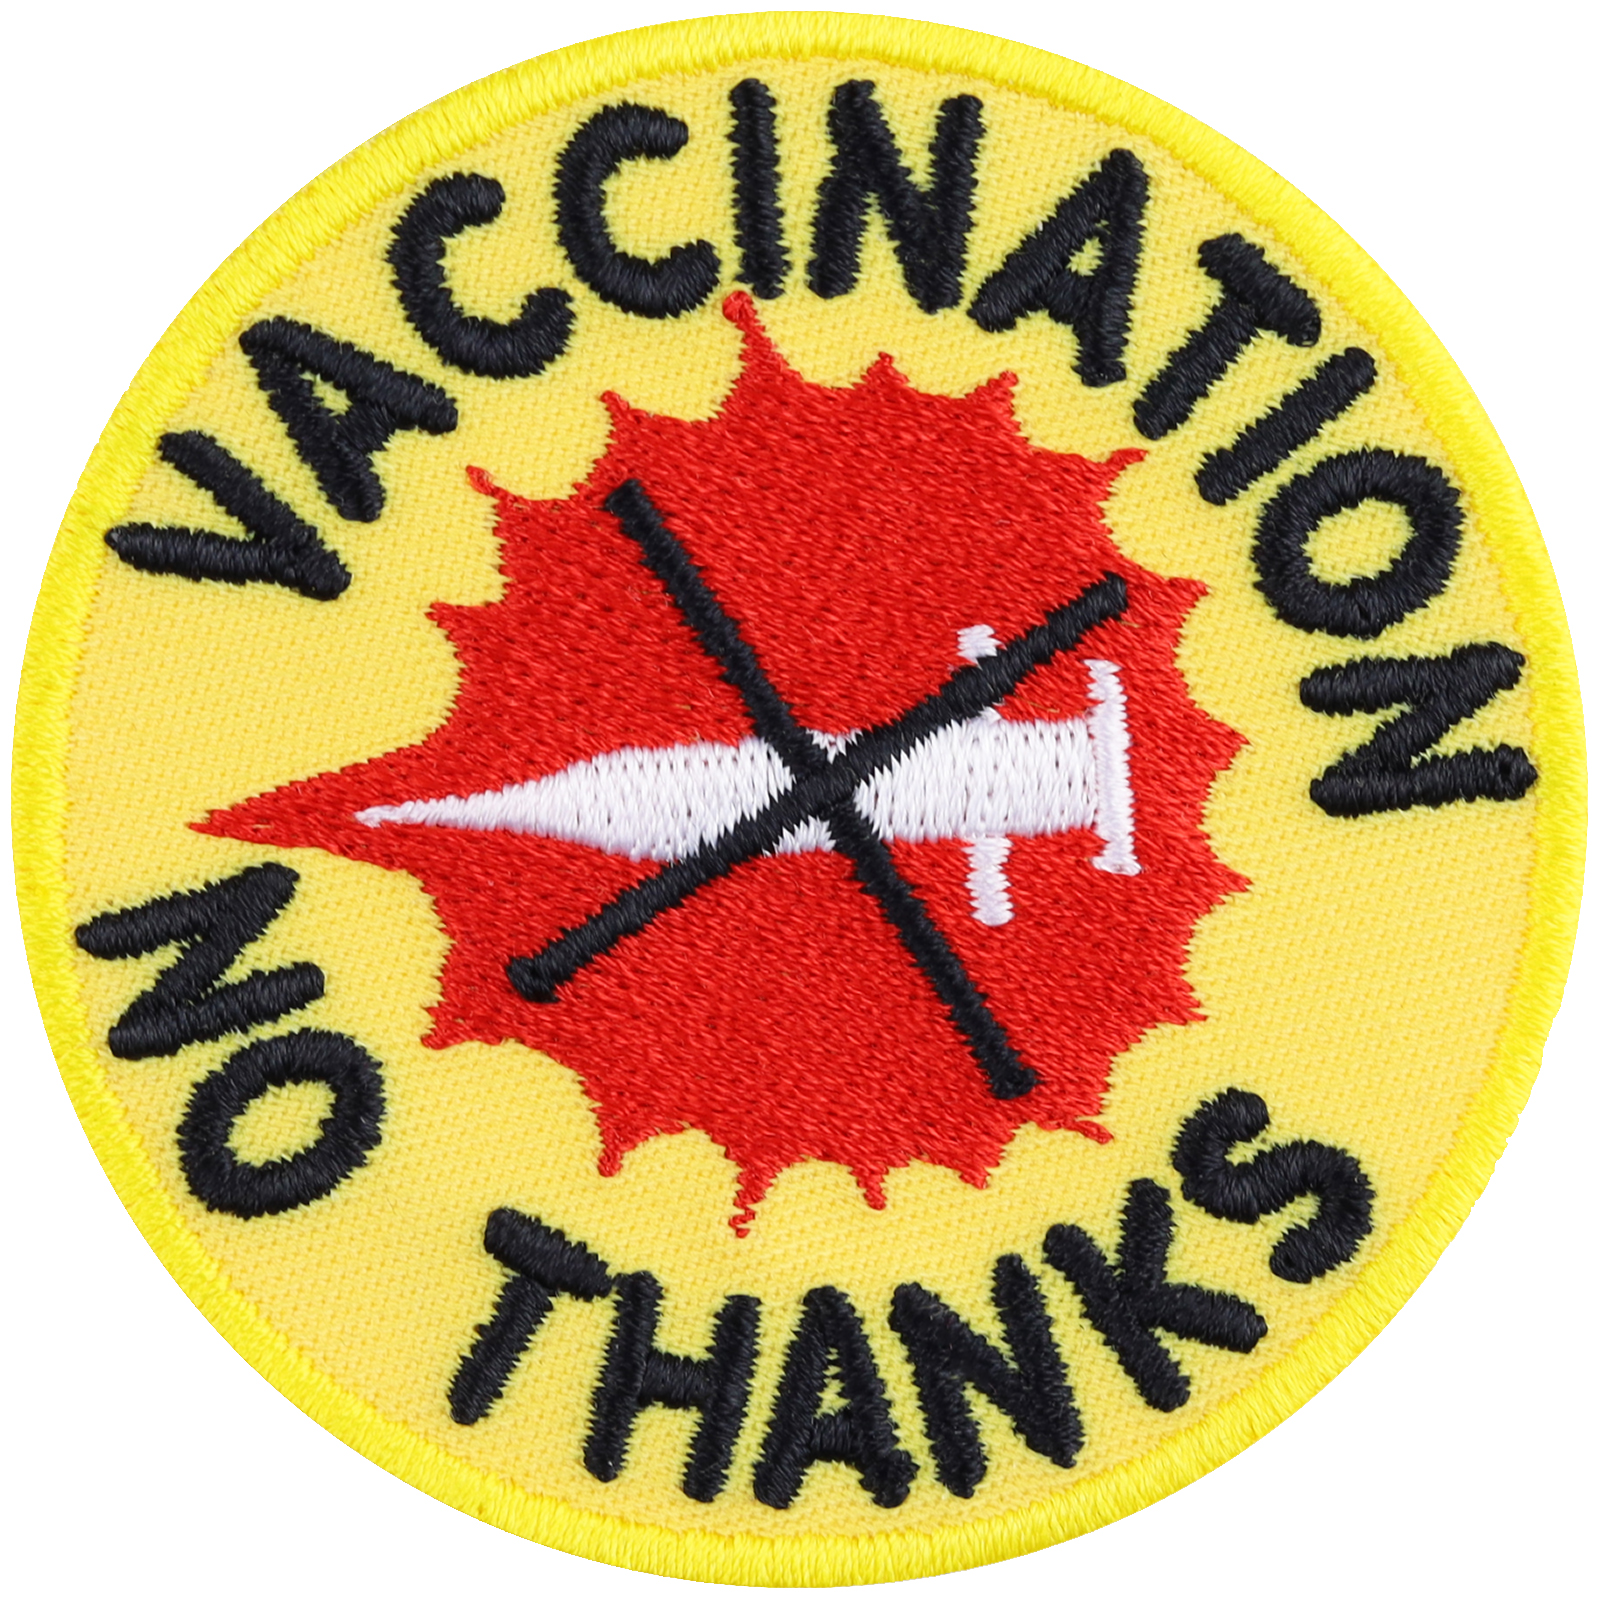 Vaccination - No thanks - Patch